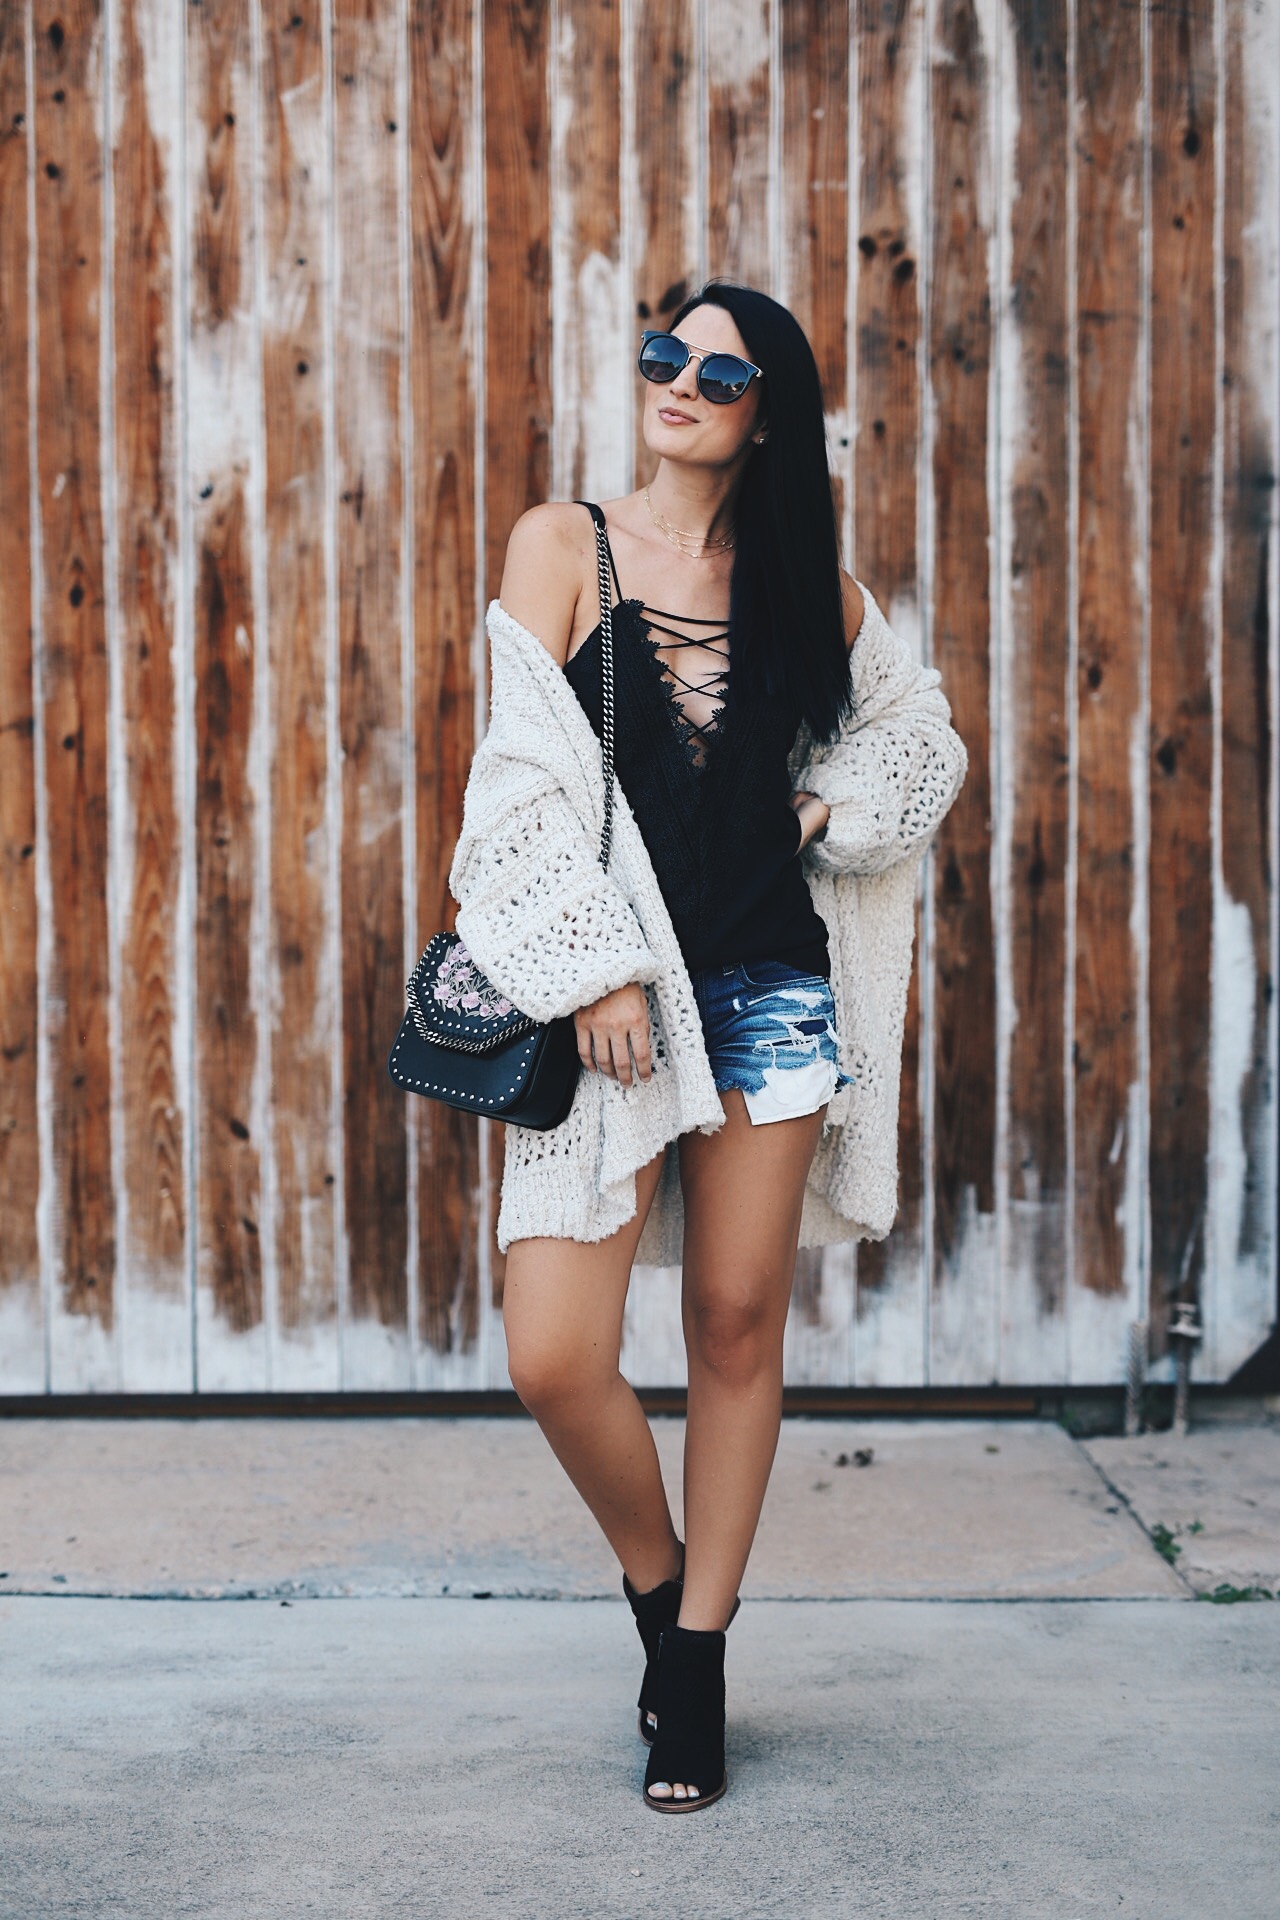 Tips to Easily Transition Your Summer Wardrobe to Fall with Nordstrom | summer to fall fashion pieces | summer to fall wardrobe | fall style ideas | transitioning seasonal wardrobes | how to style clothing from summer to fall | summer to fall style tips || Dressed to Kill